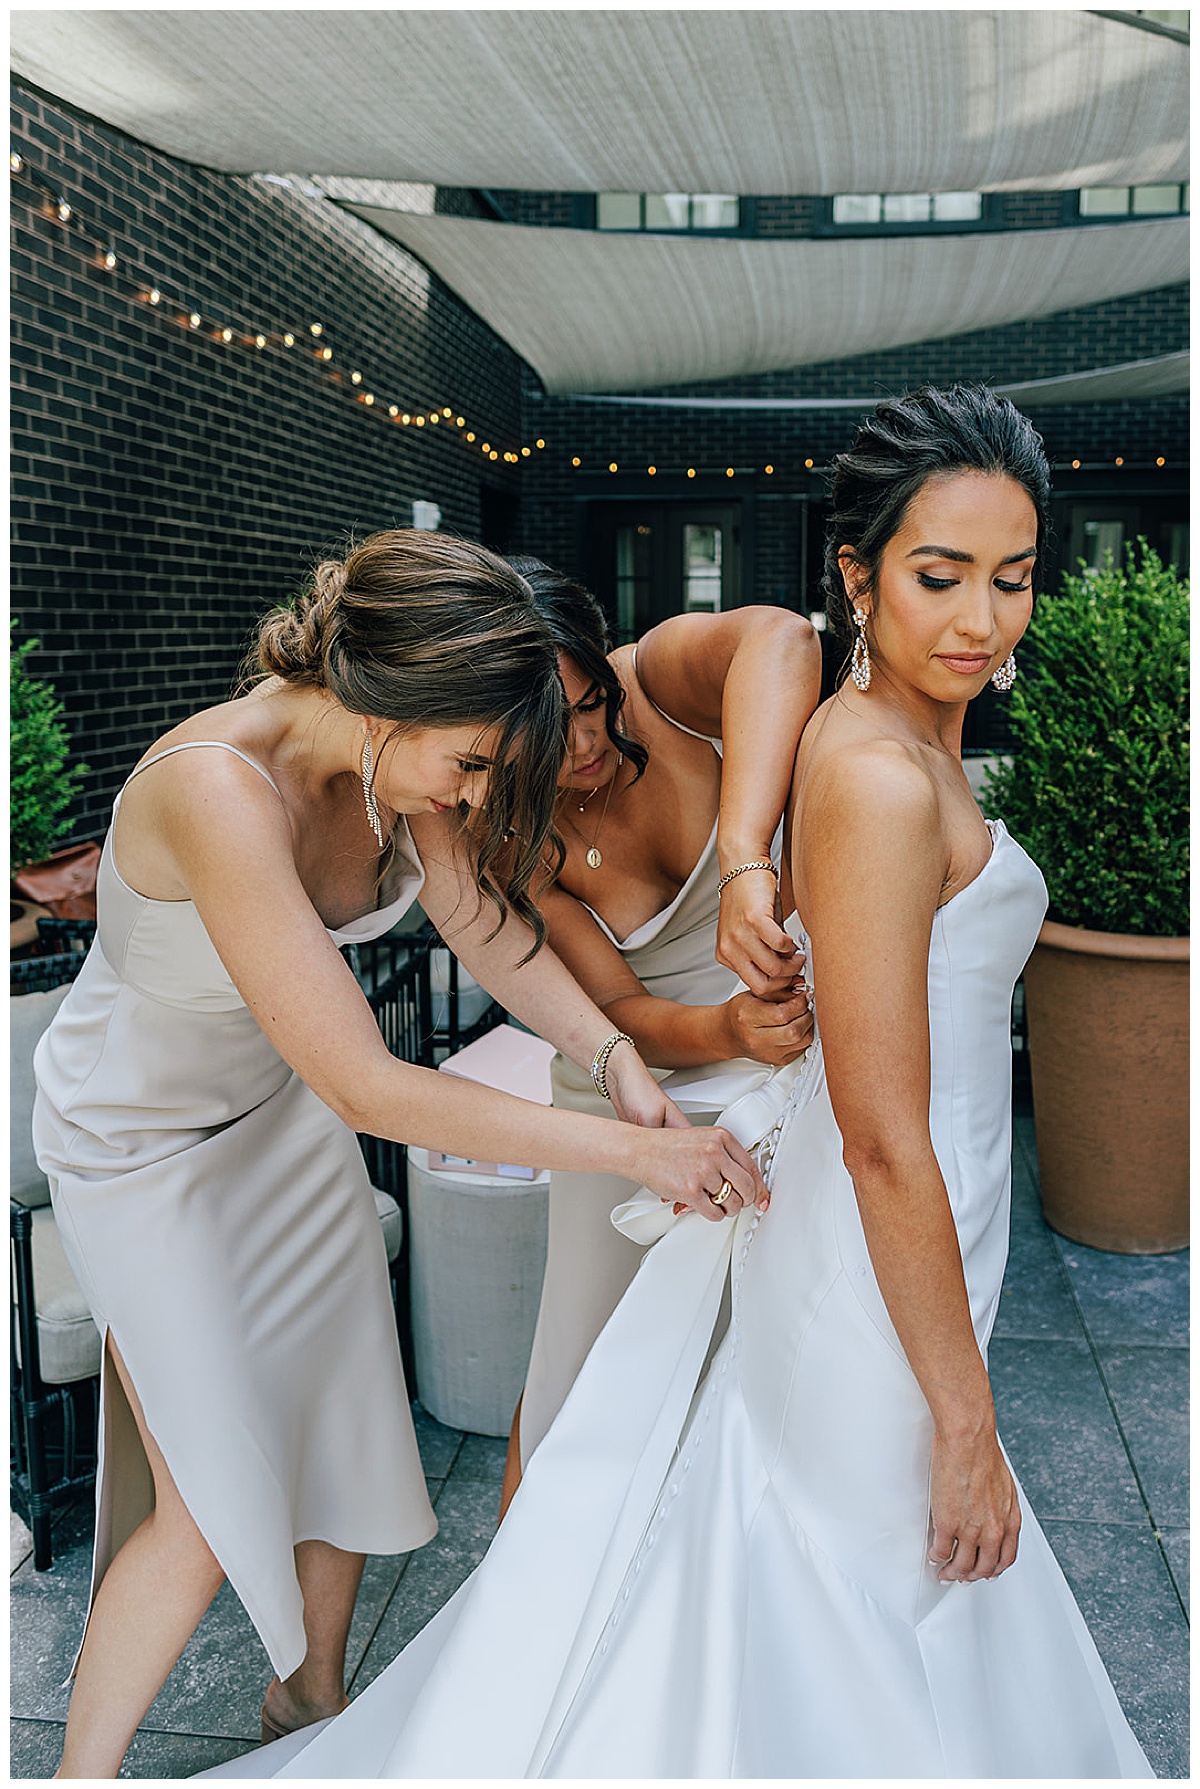 Choosing The Right Location For Your Getting Ready Photos is important to get those beautiful memories of your bridesmaids helping you in your dress